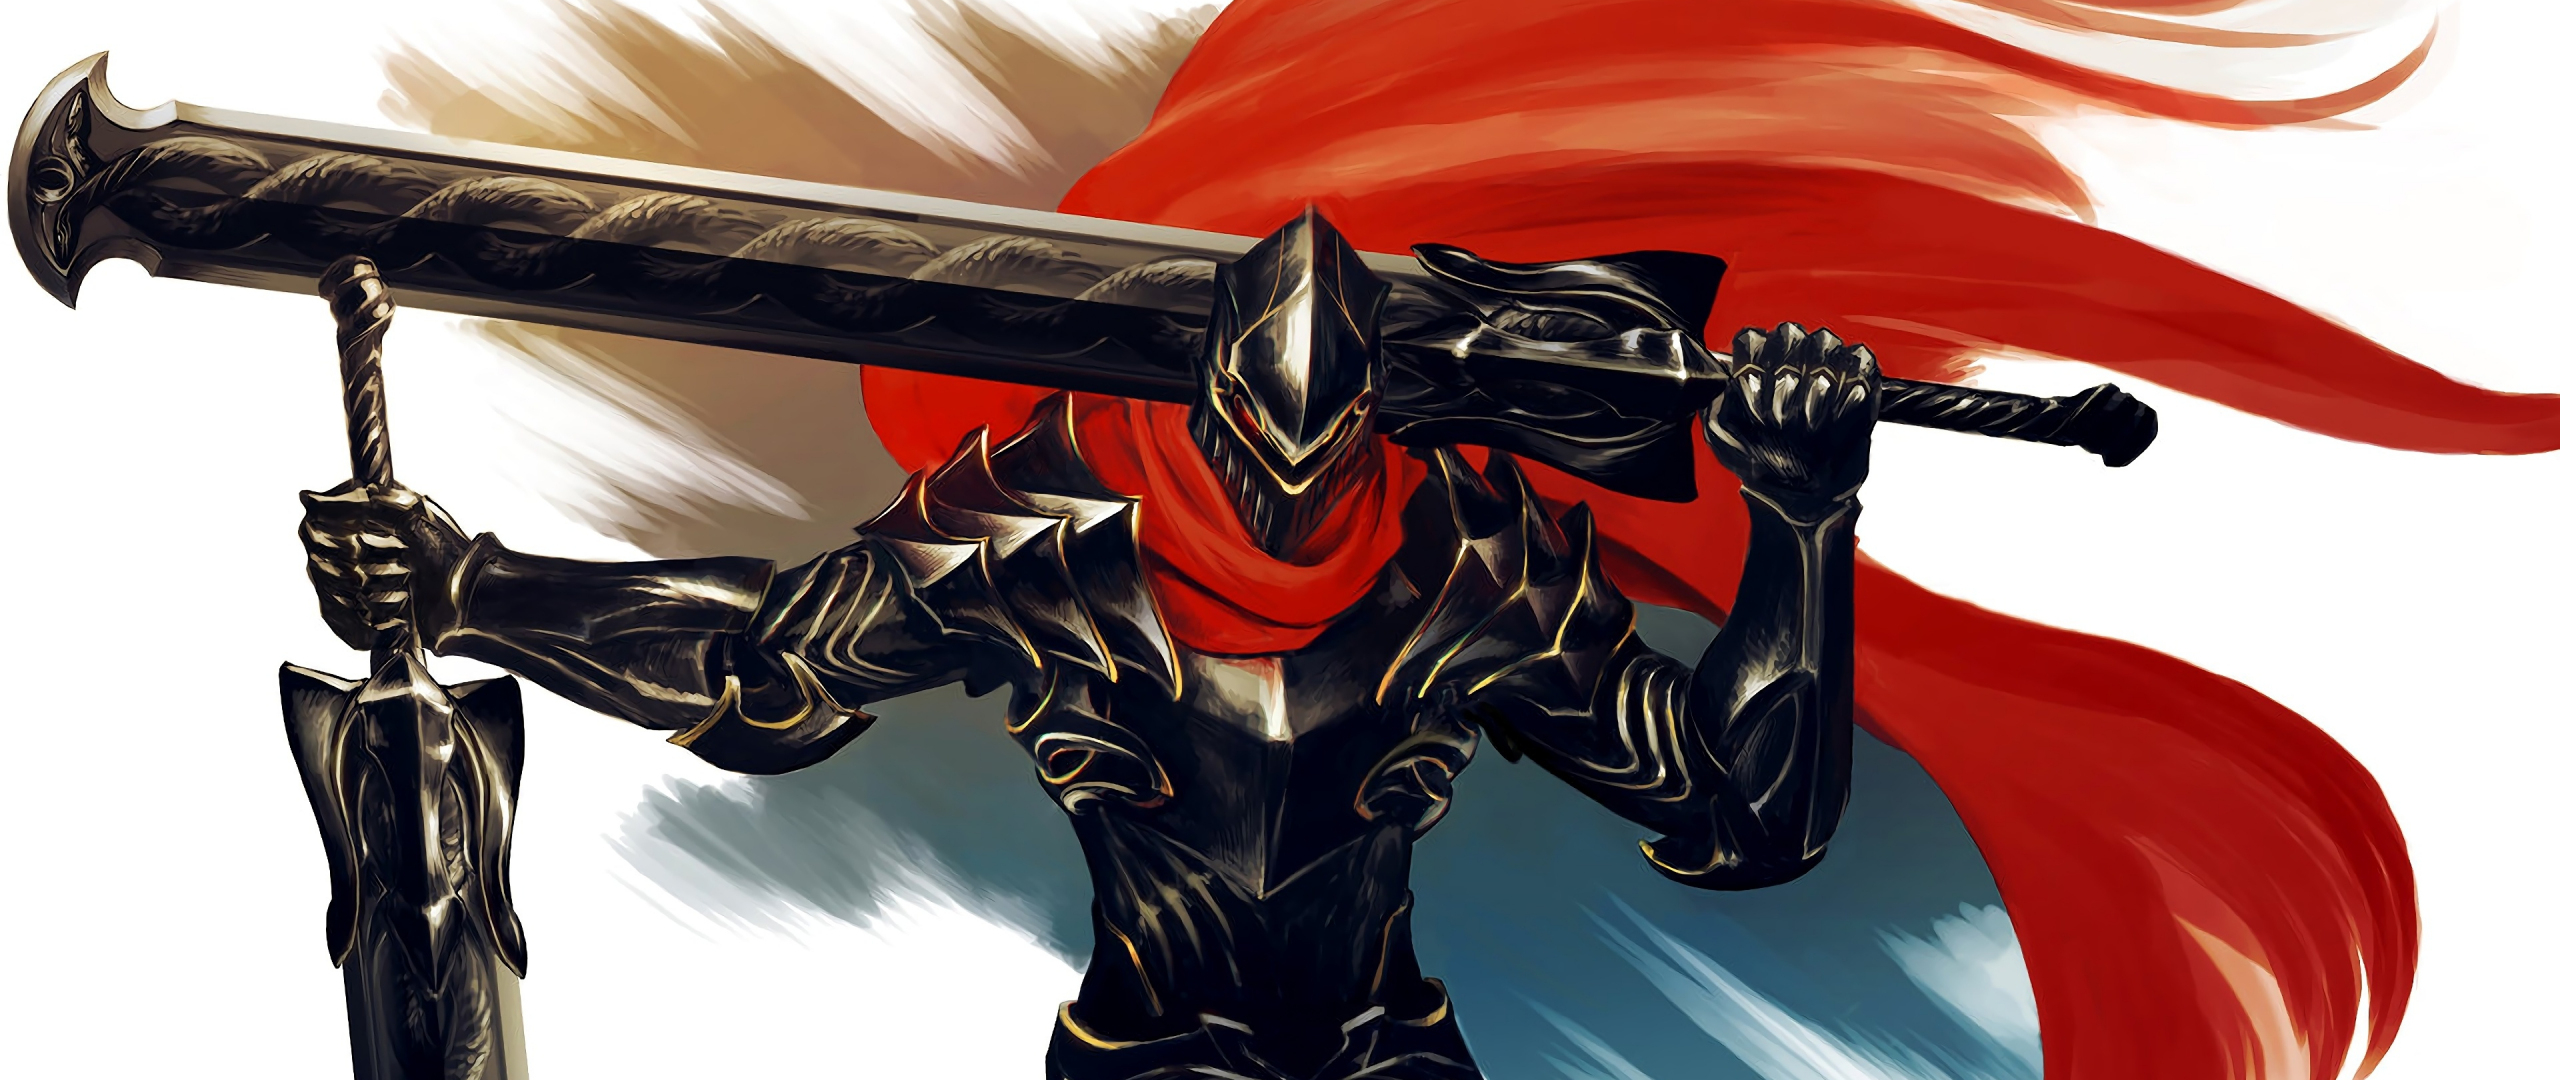 2560x1080 Download wallpaper armour, big sword, warrior, overlord, anime, art, dual wide hd background, 10184